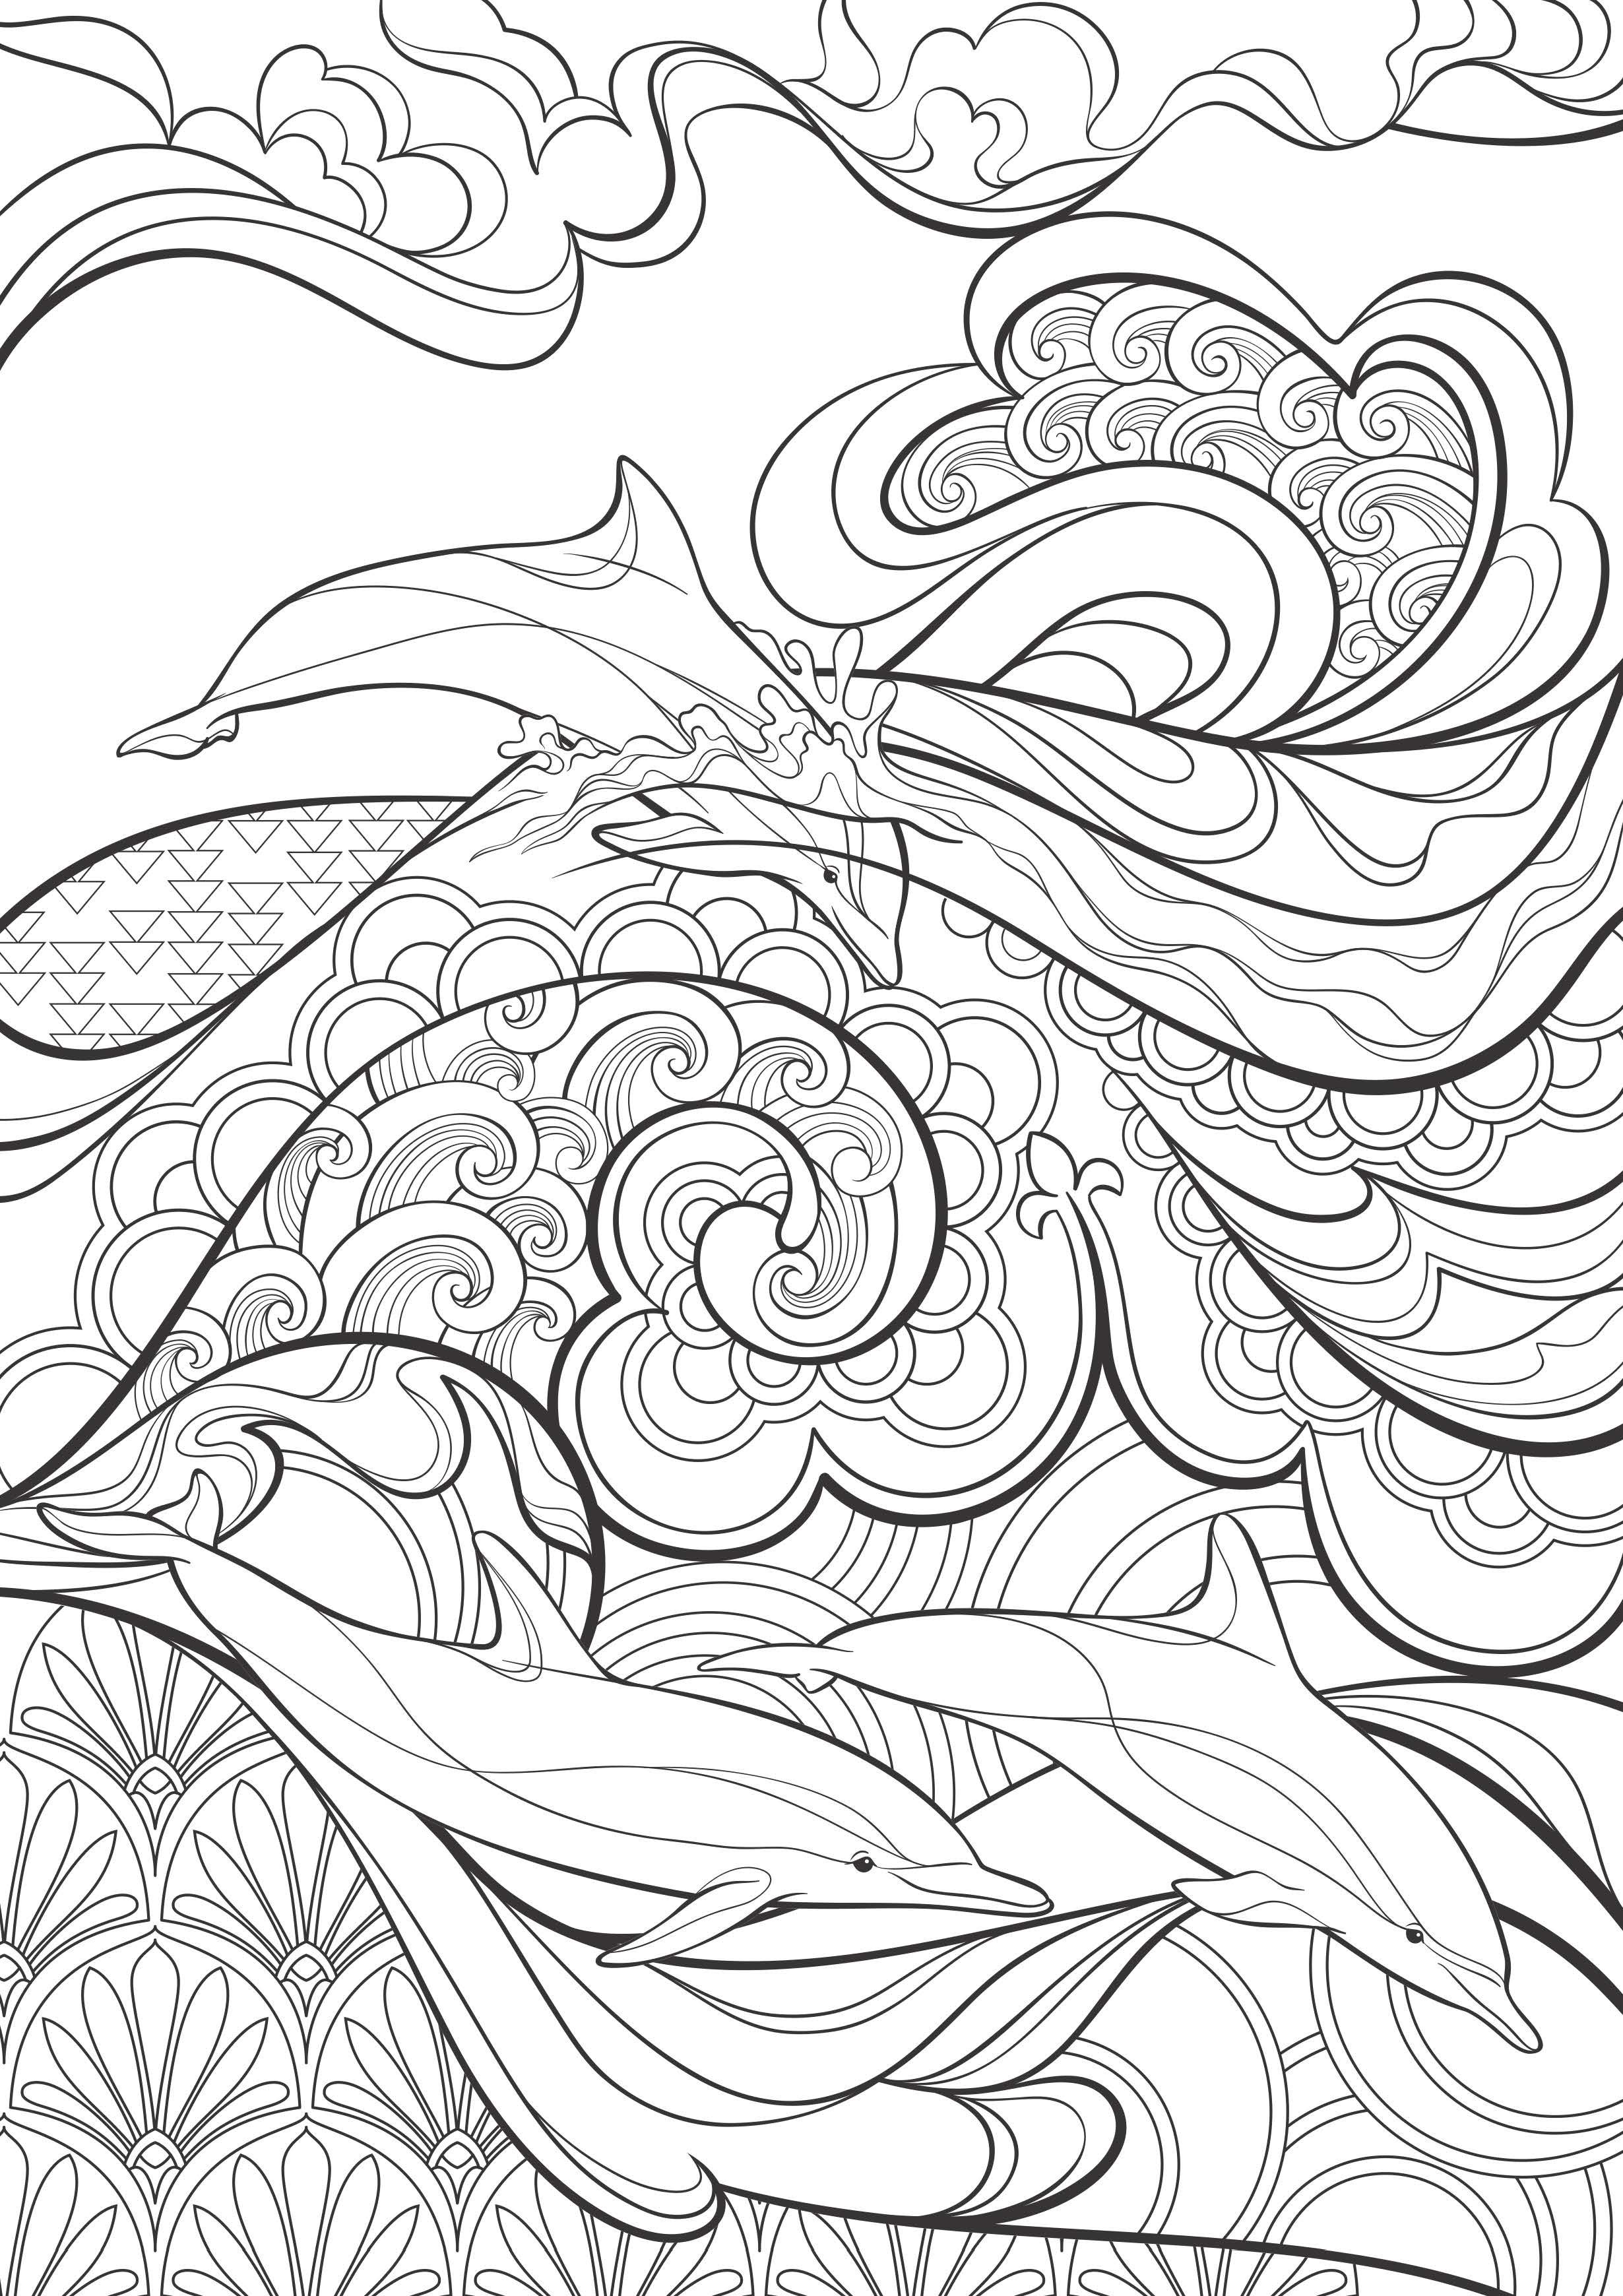 How to Print Coloring Pages: The Ultimate Guide